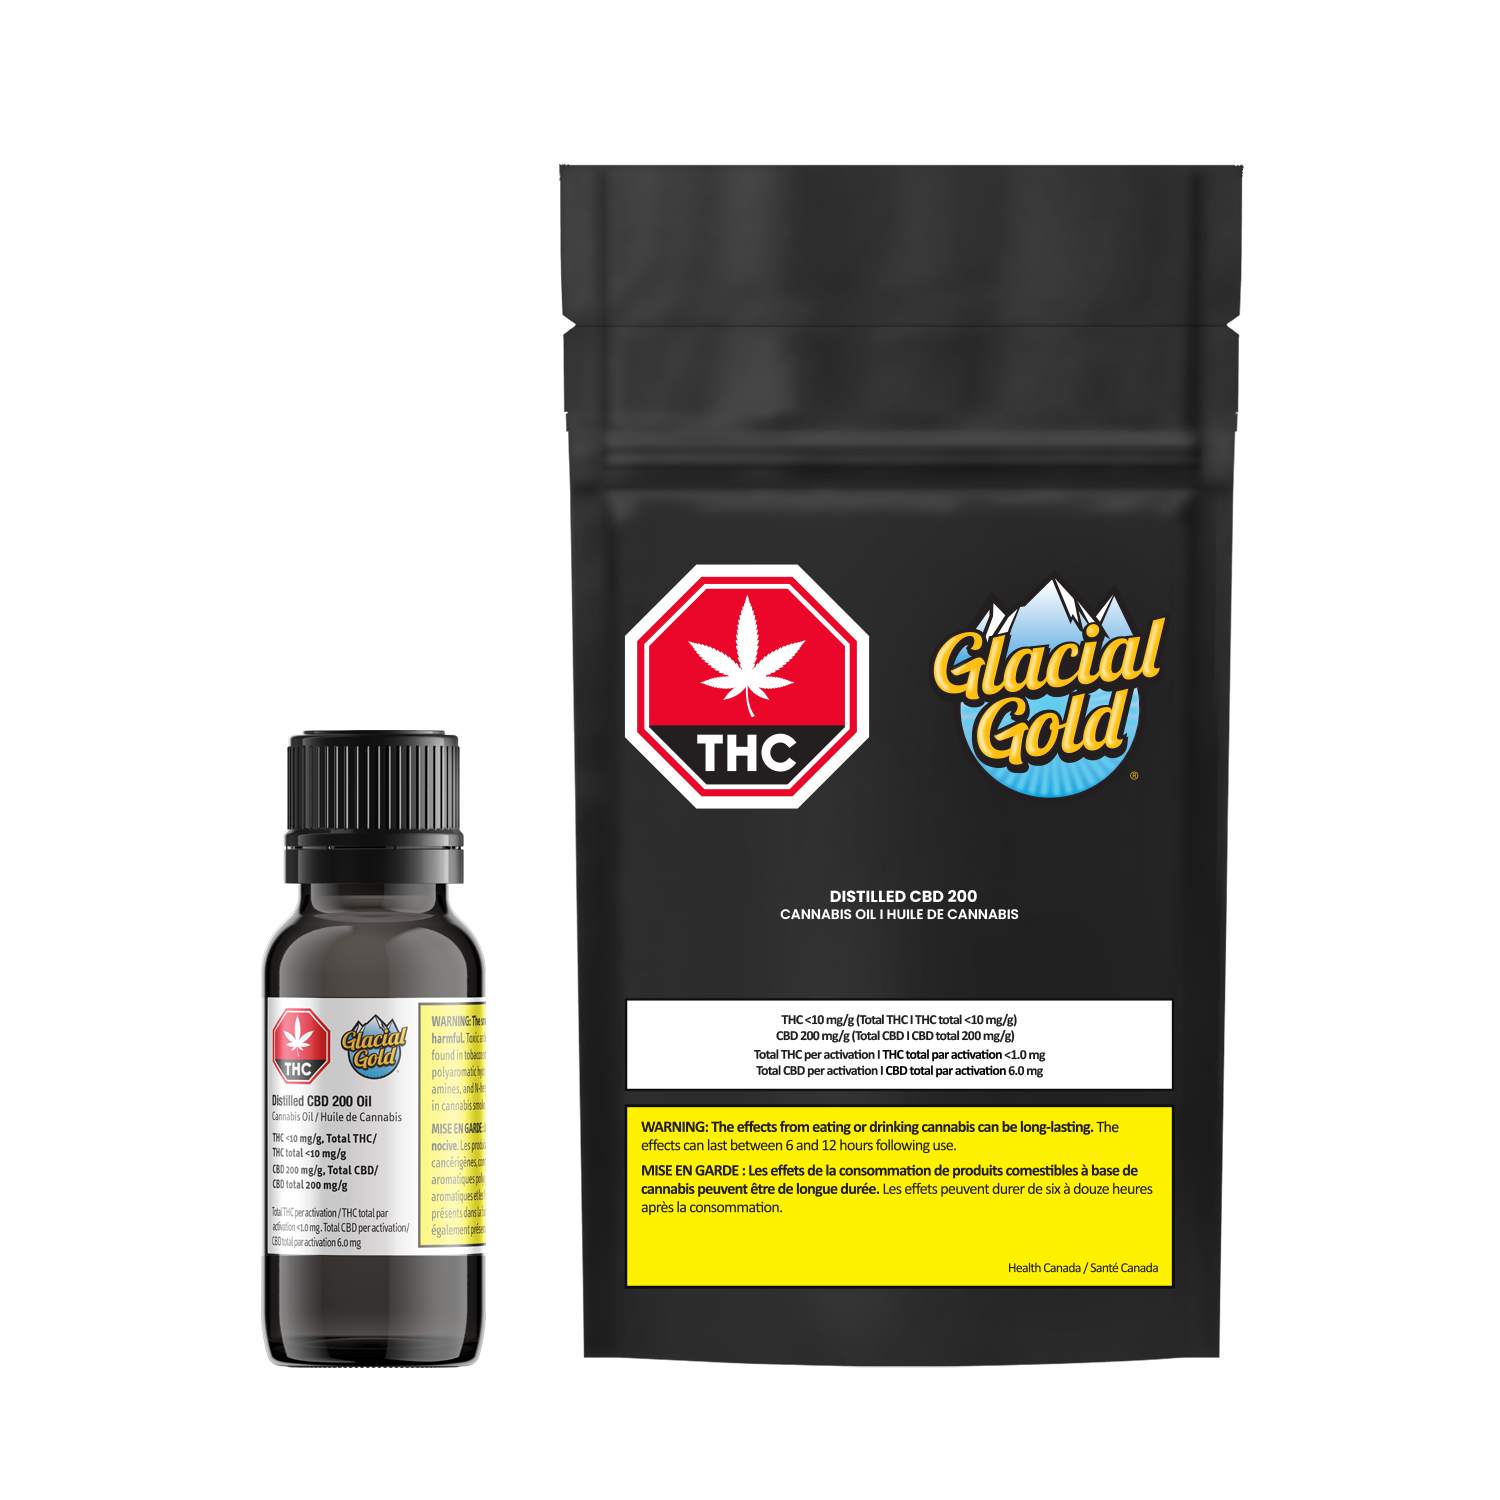 Cannabis Product Glacial Gold - Distilled CBD 200 Oil Drops by Glacial Gold - 1